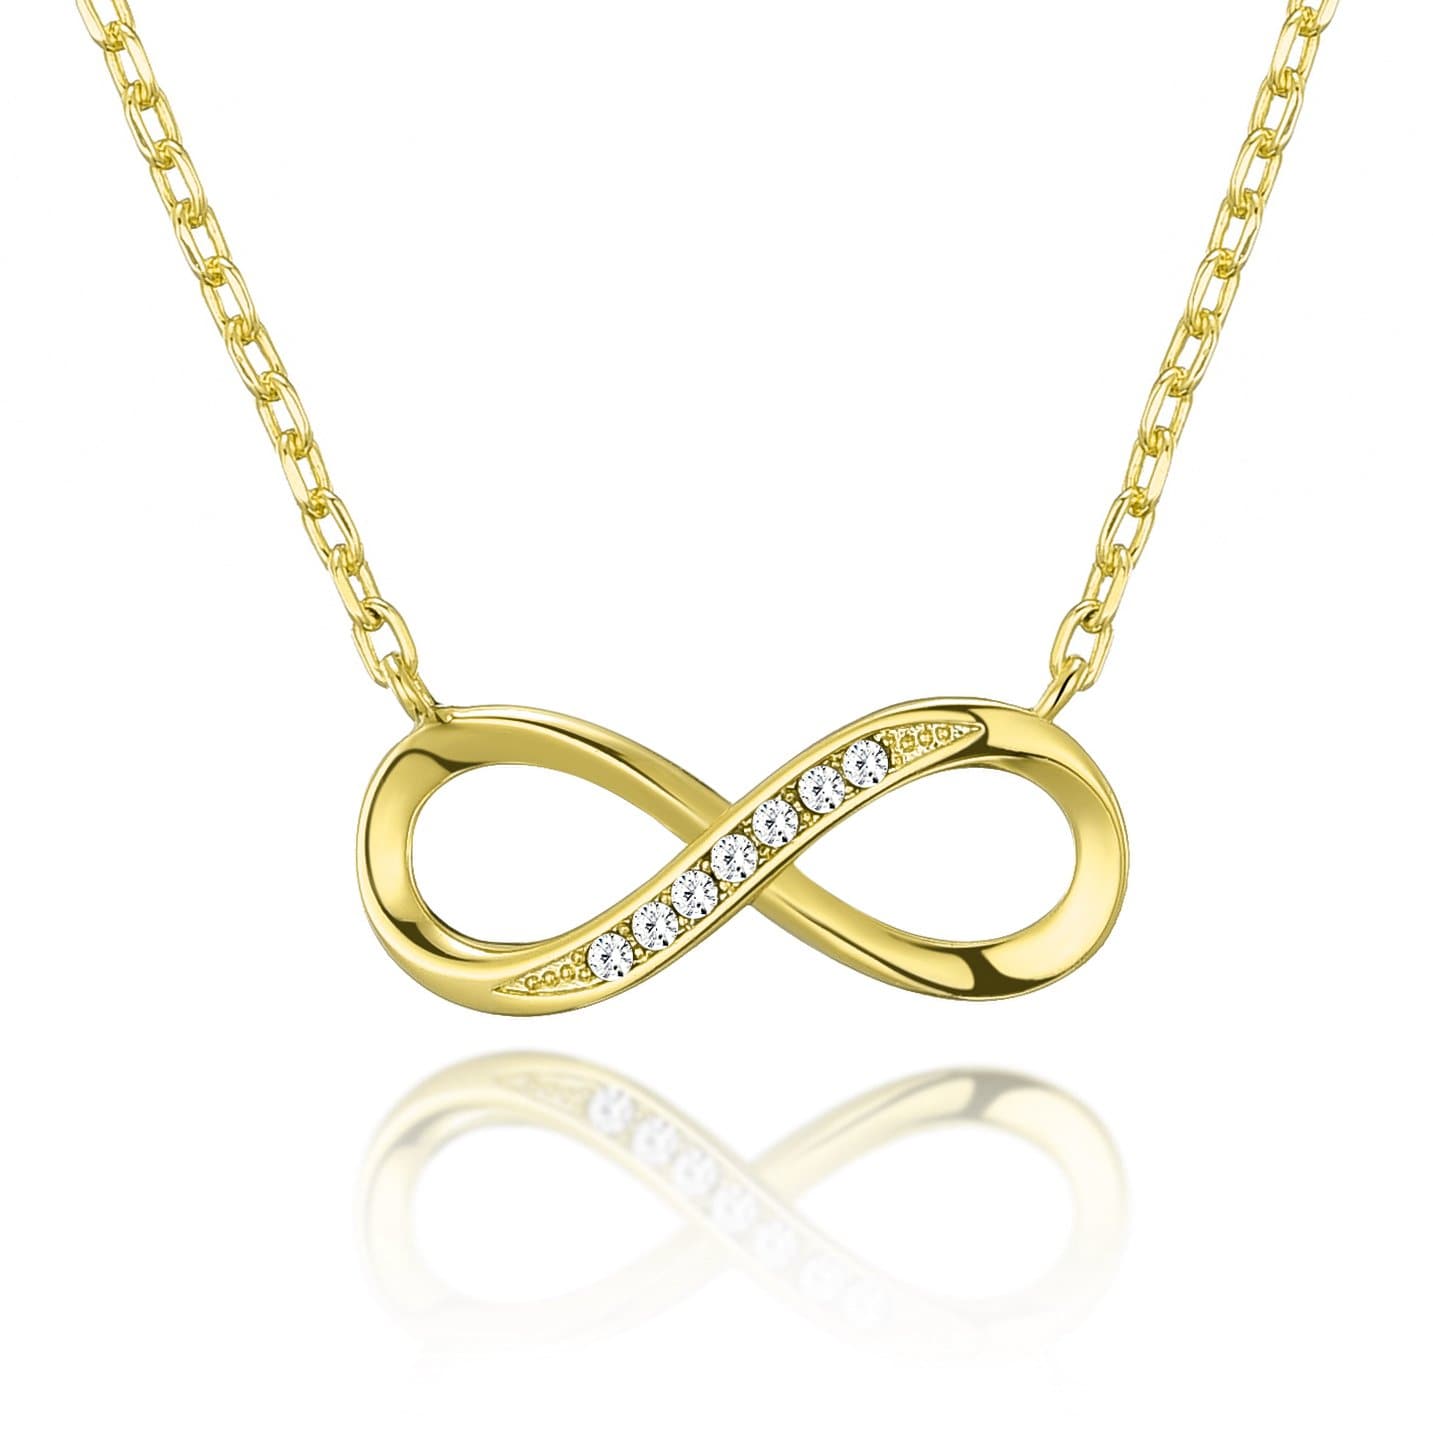 Gold Plated Infinity Pendant Necklace Created with Zircondia® Crystals by Philip Jones Jewellery